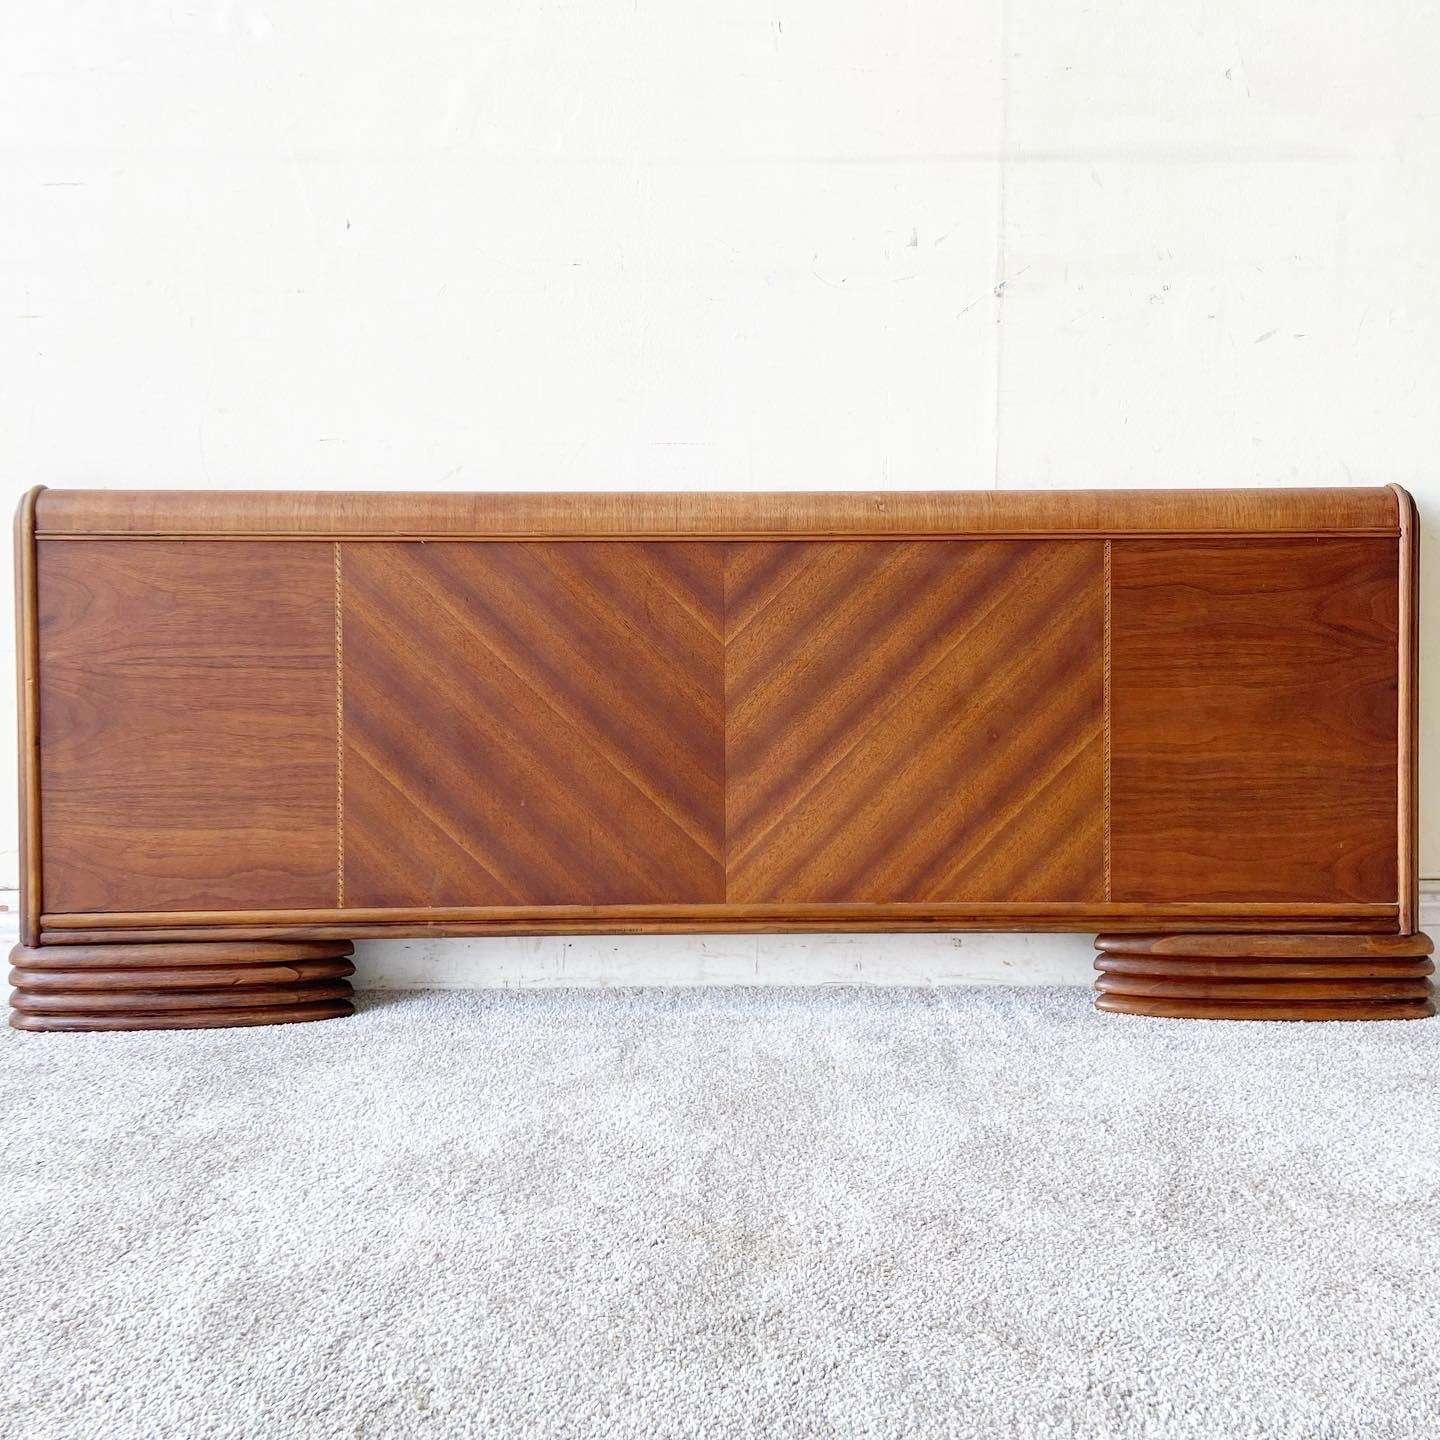 Amazing Art Deco full size wooden headboard with footboard. Each feature fantastically finished veneers.

Footboard dimensions:
56w x 3d